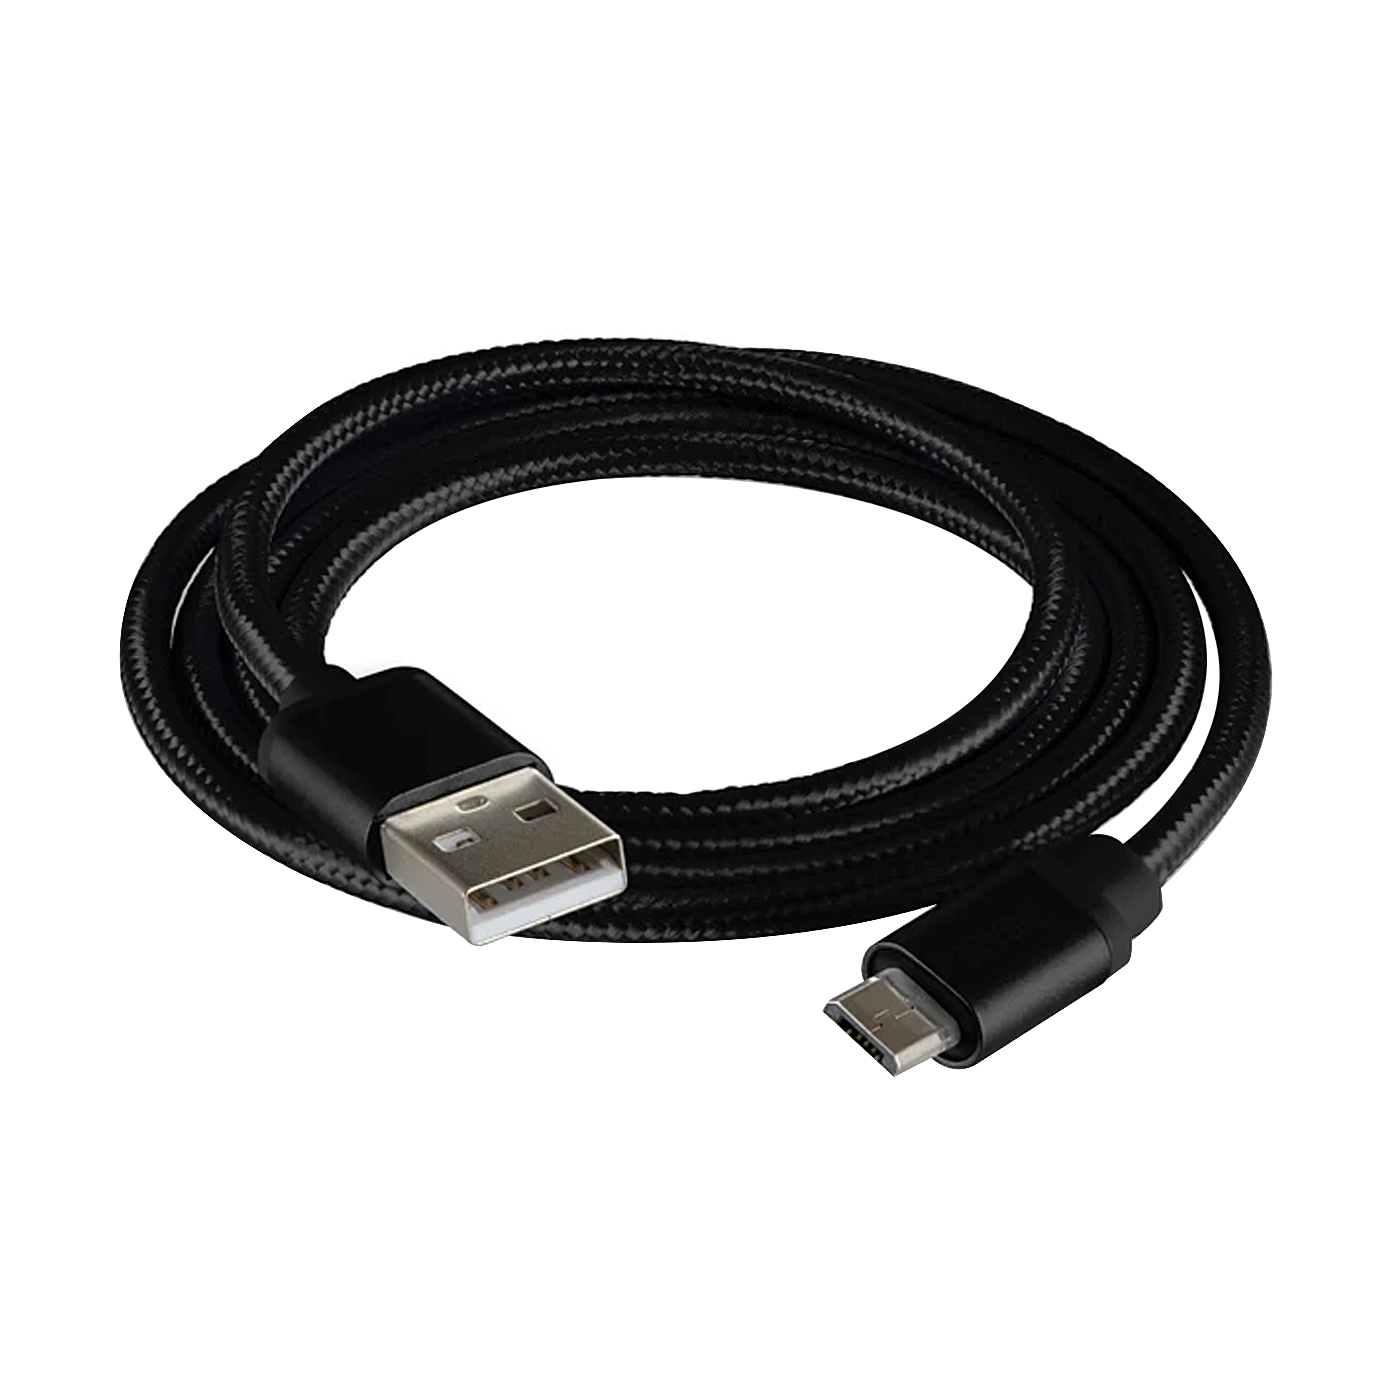 D & G Braided Micro USB Fast Charger Cable Lead for Amazon Kindle Fire HD HDX Tablet 